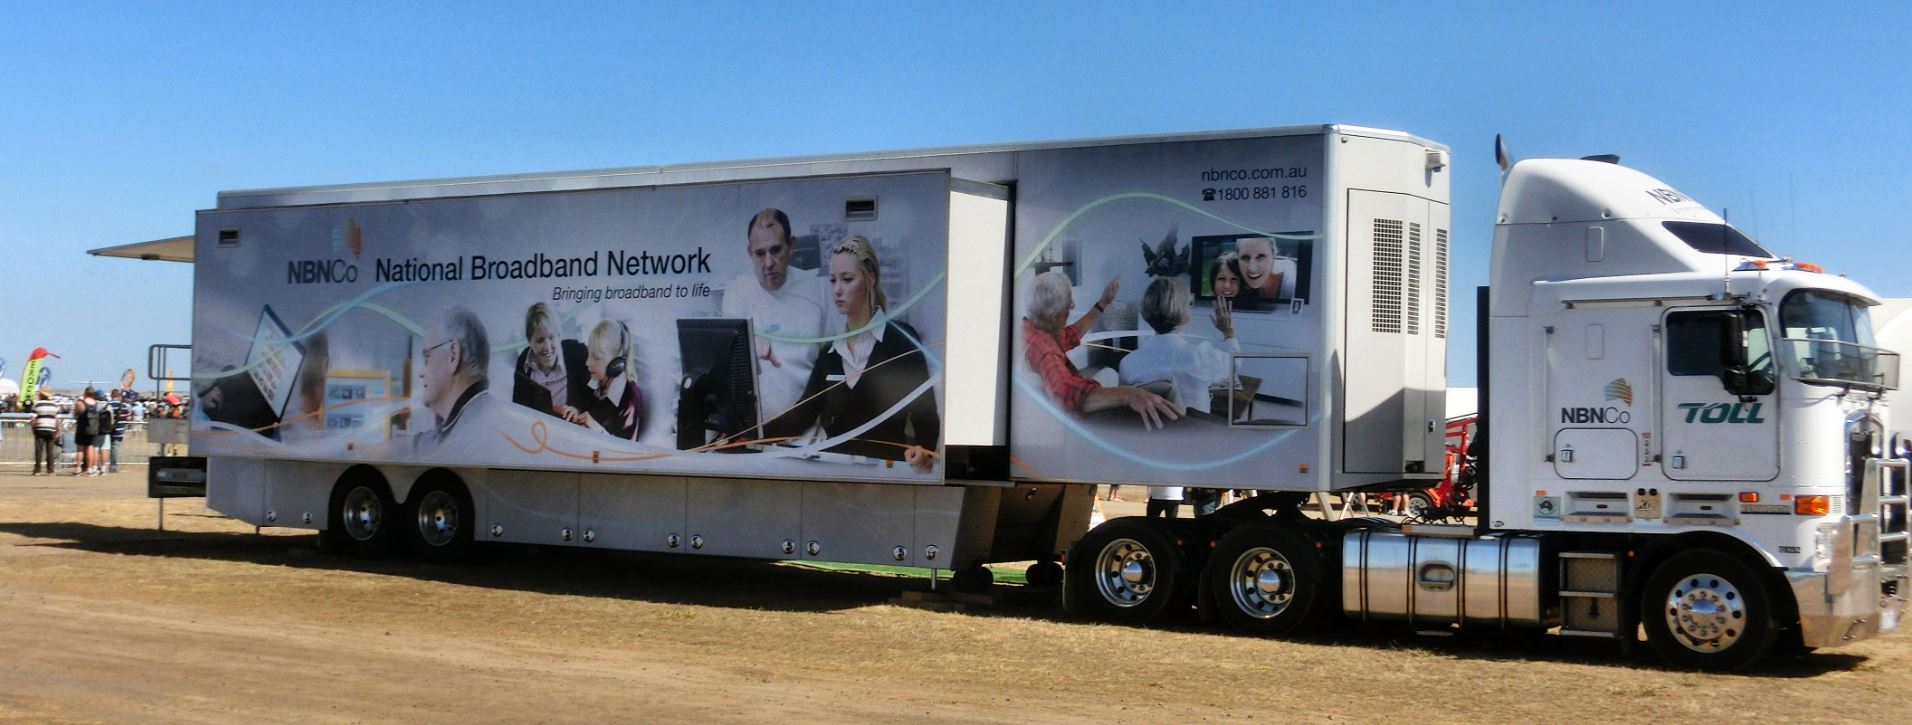 NBN Truck and trailer